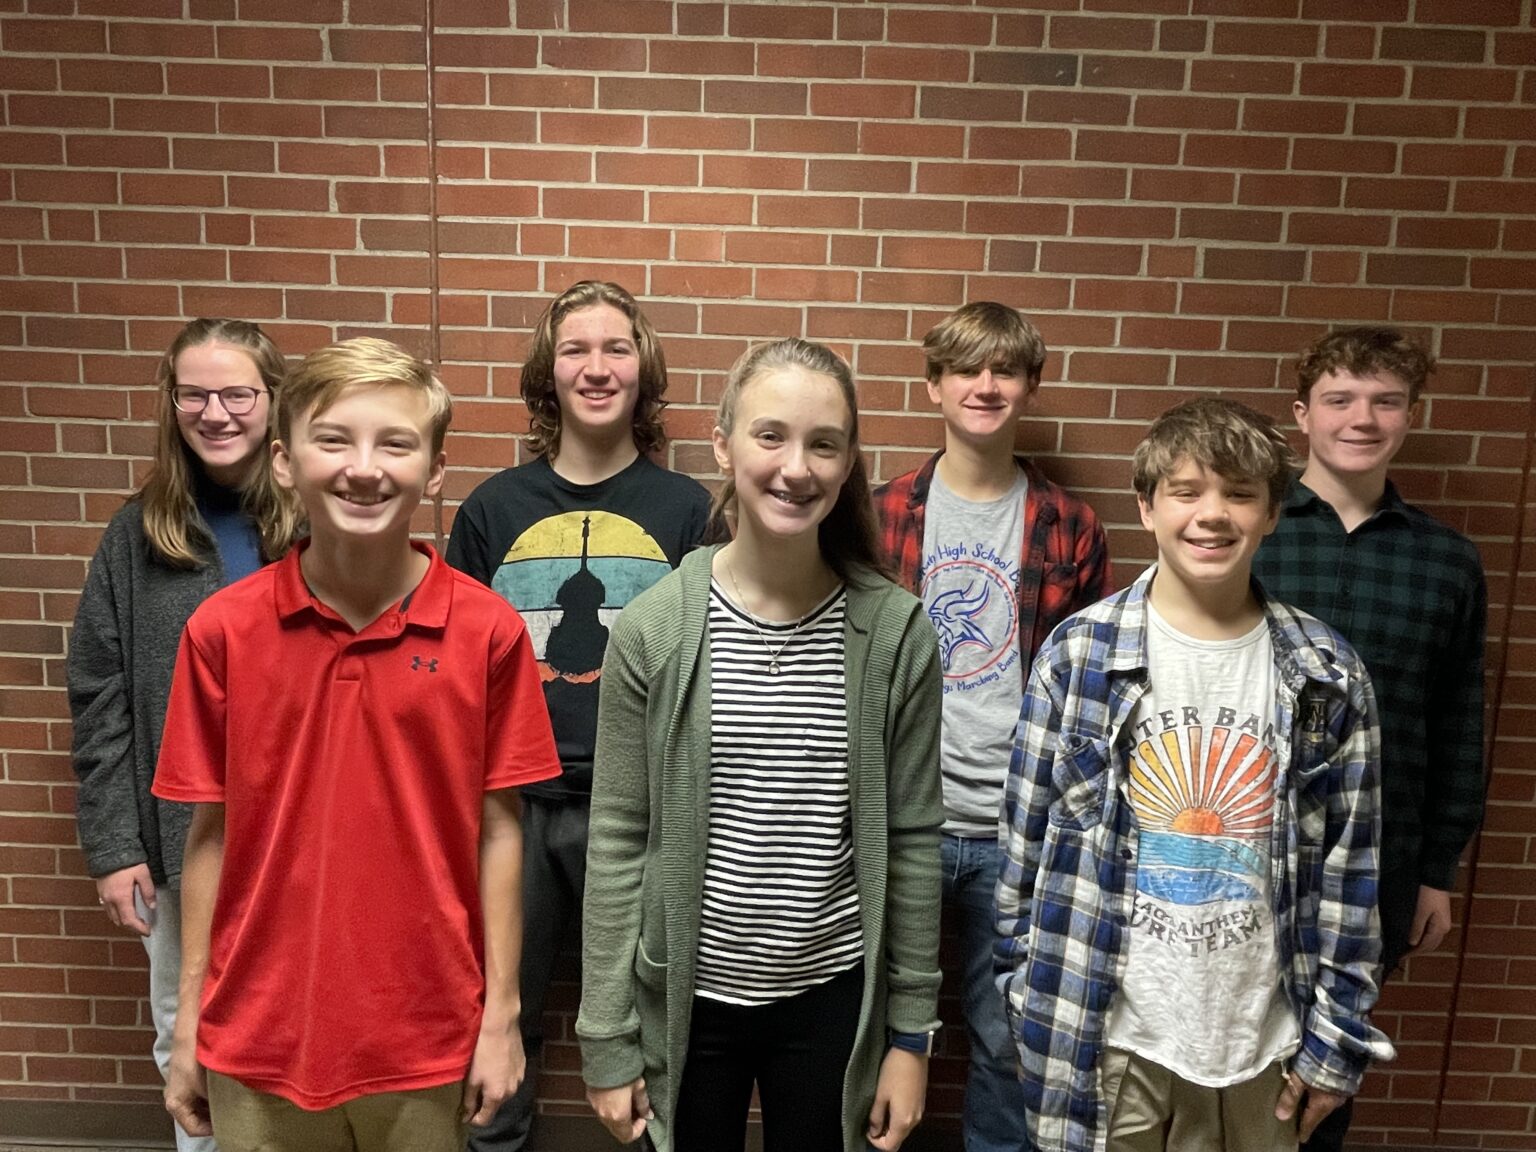 A Record 36 Decorah Students Selected for Opus Honor Choir Festival